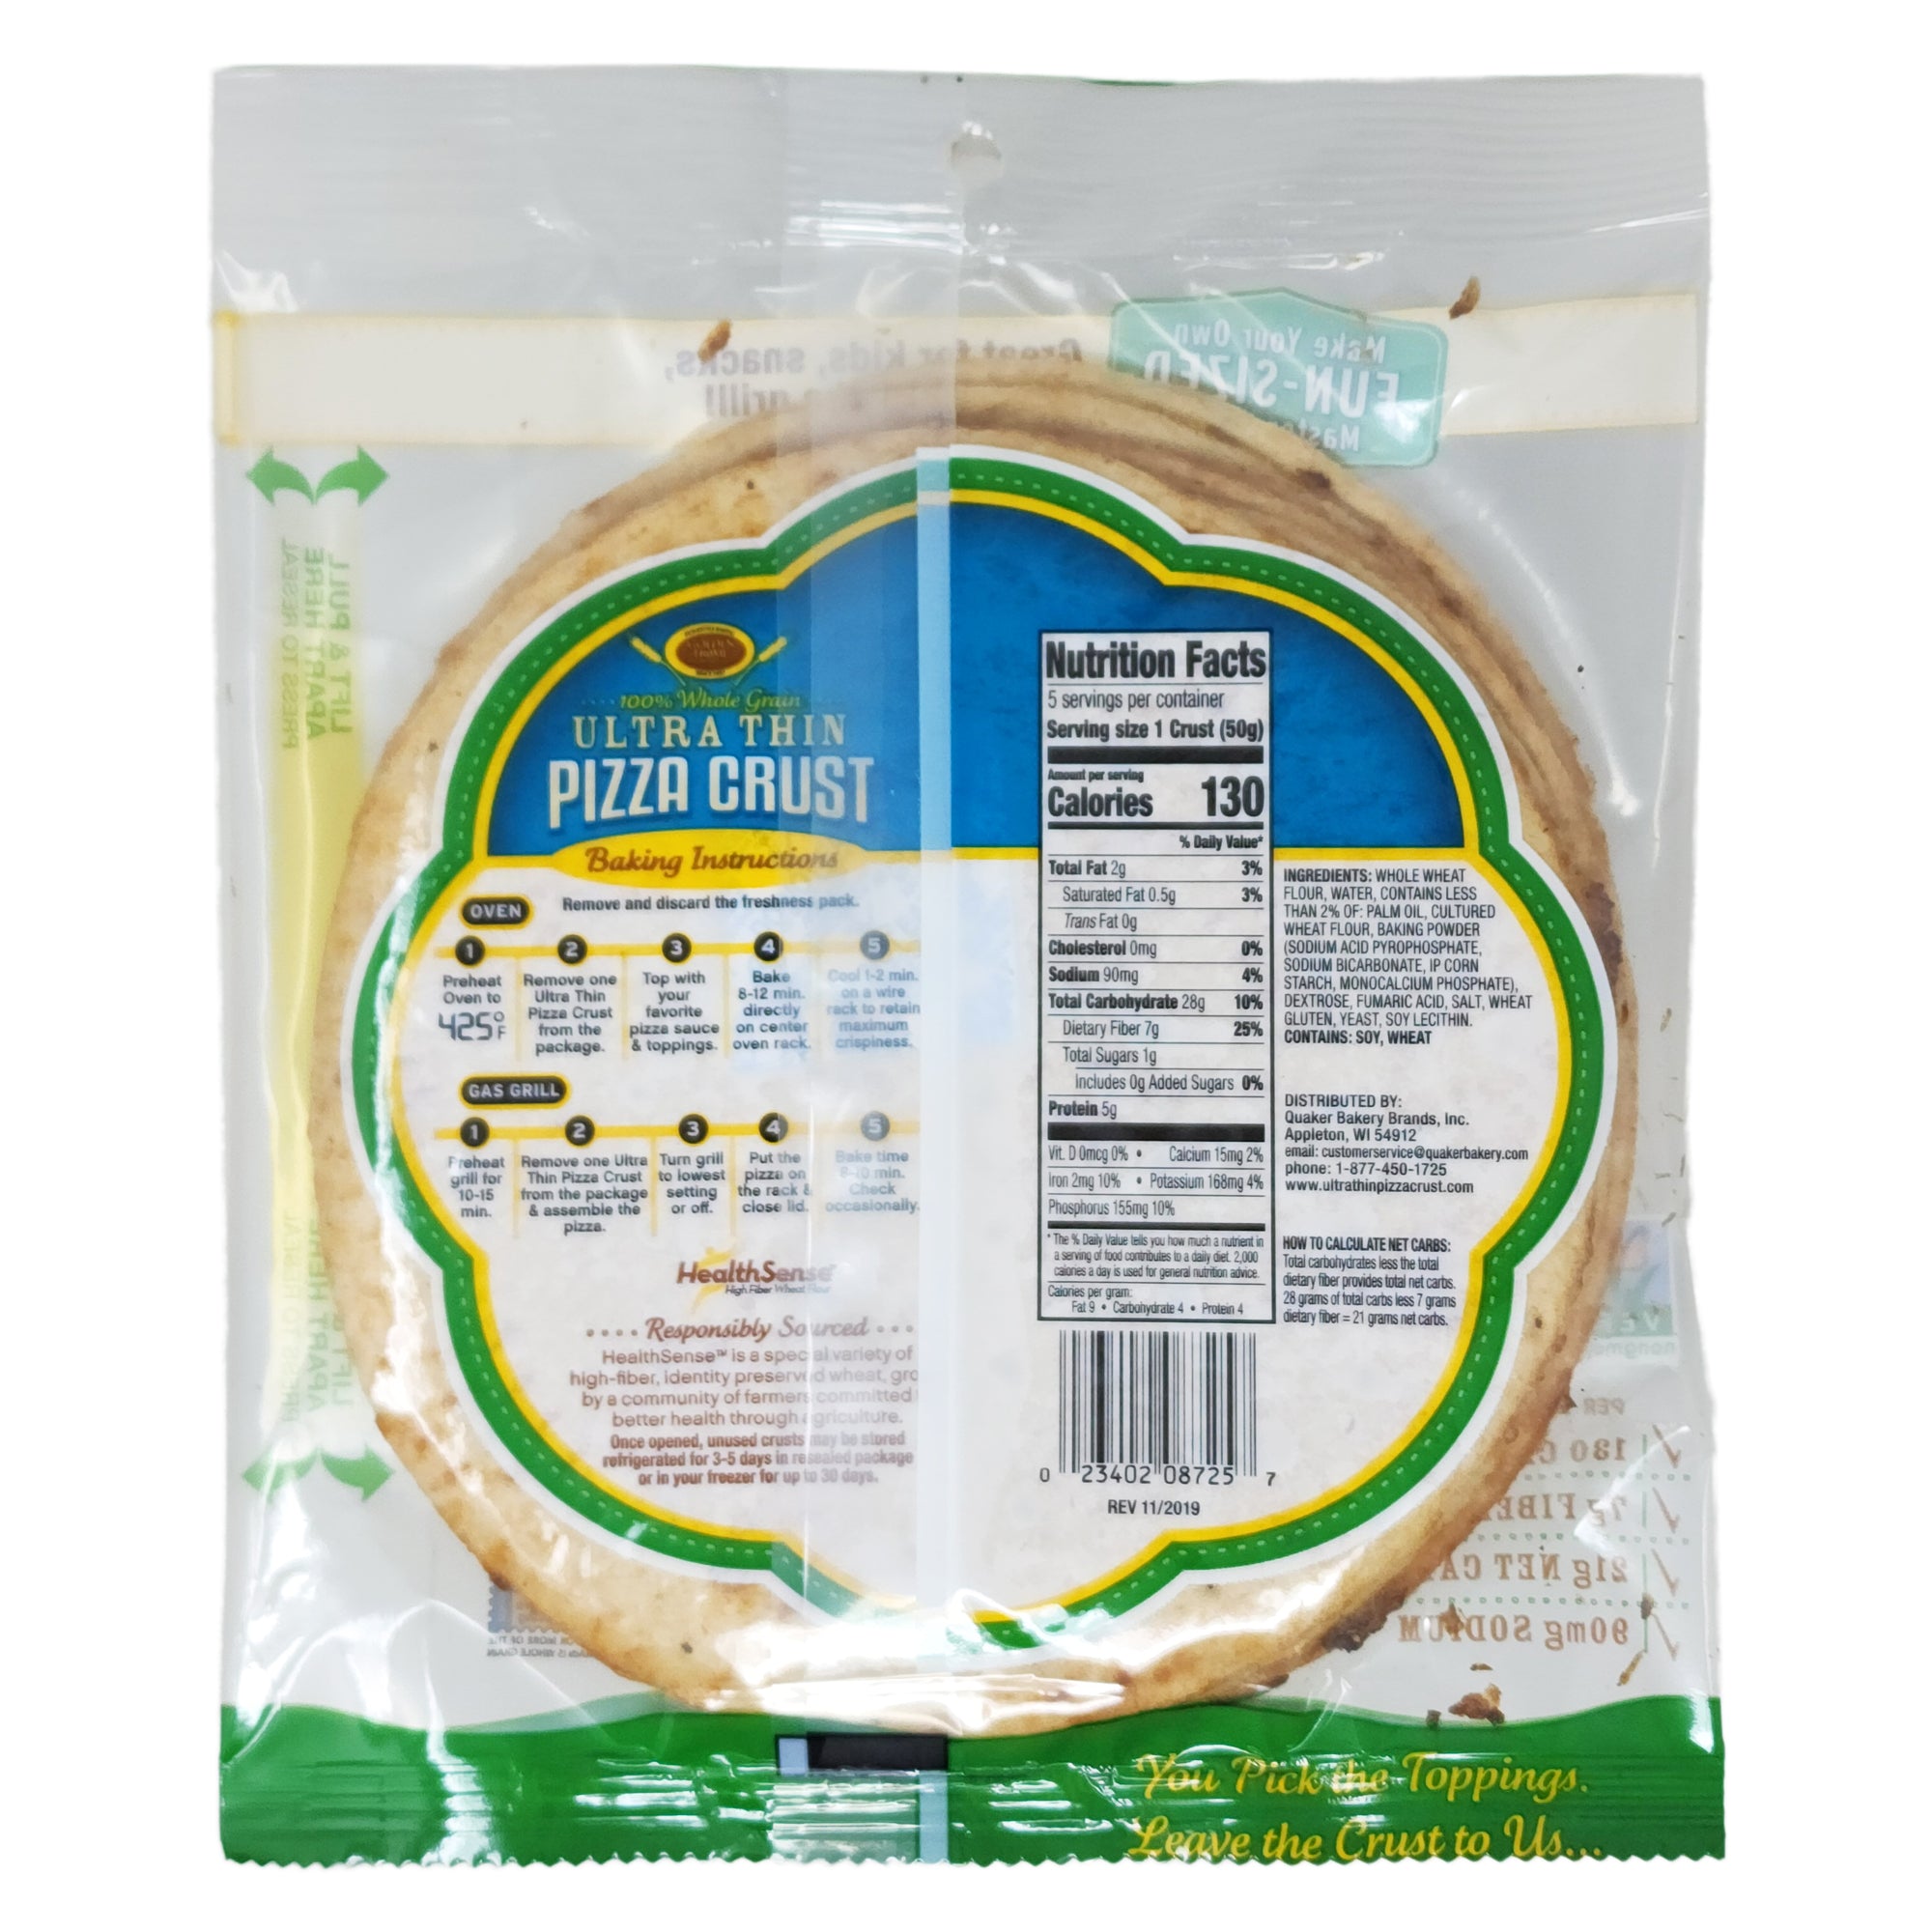 7 inch - Golden Home Ultra Thin Crust Pizza - 8.75oz. - Healthy